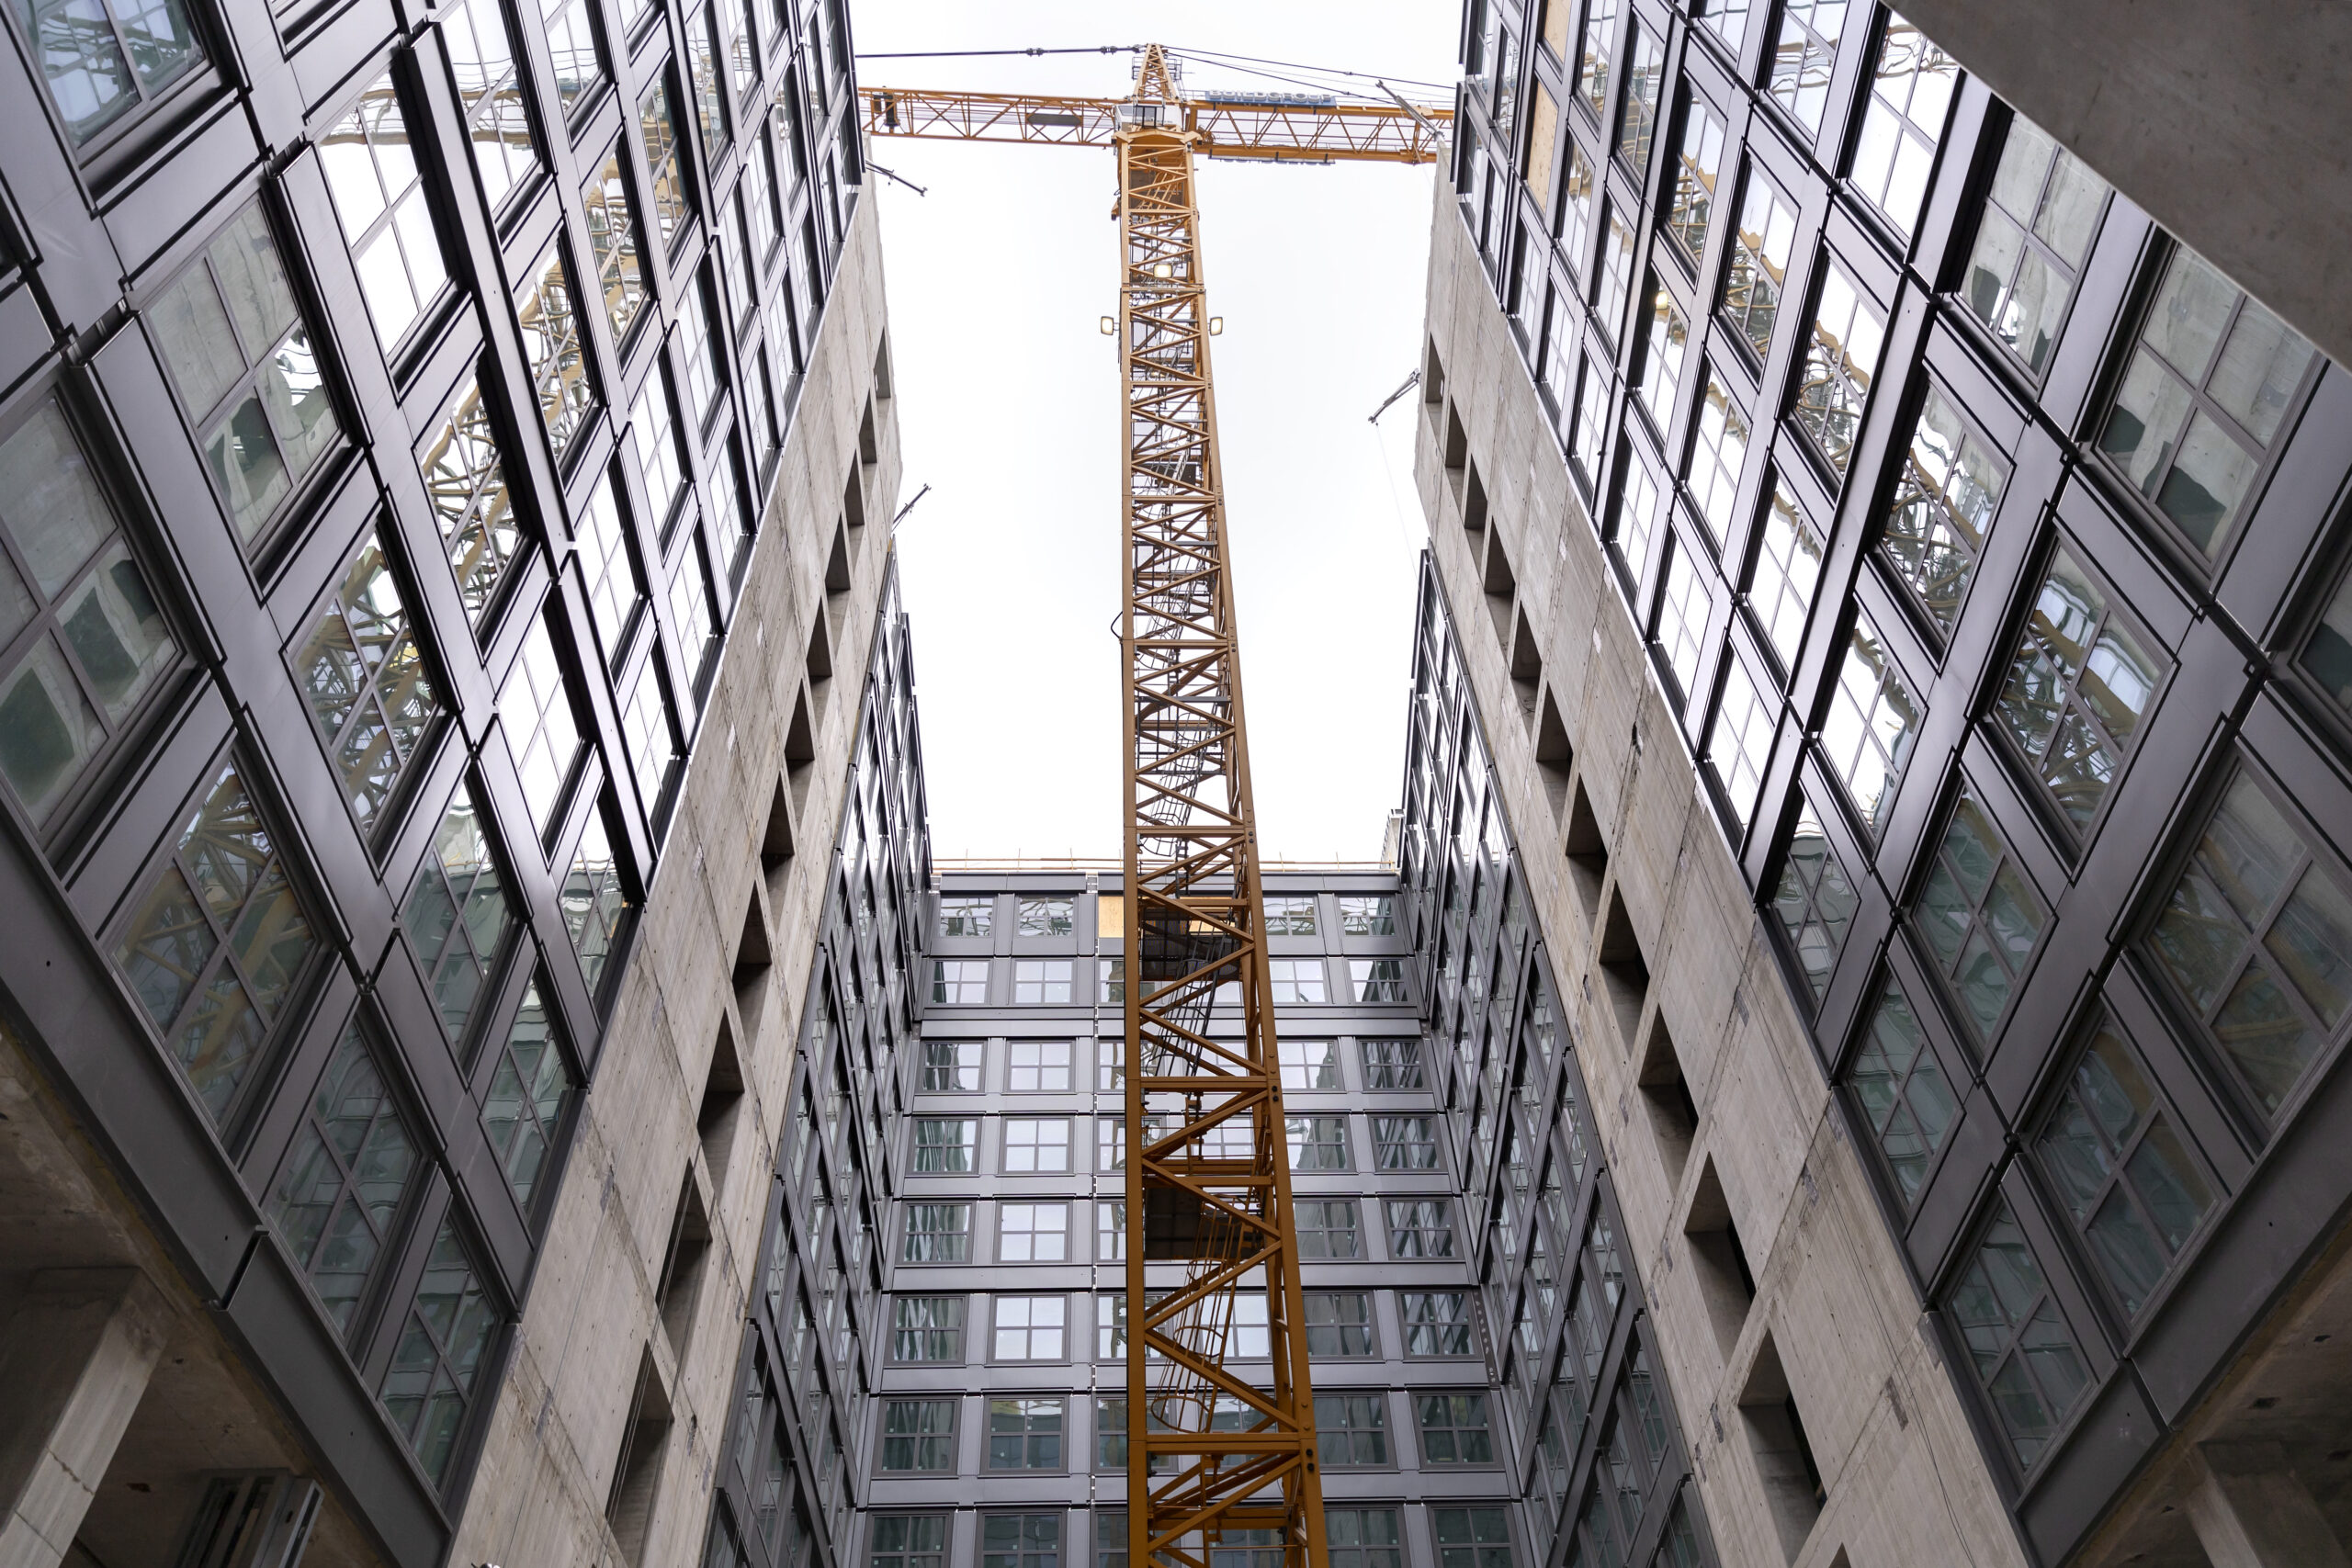 A photo shows a large crane inside the courtyard of a building under construction